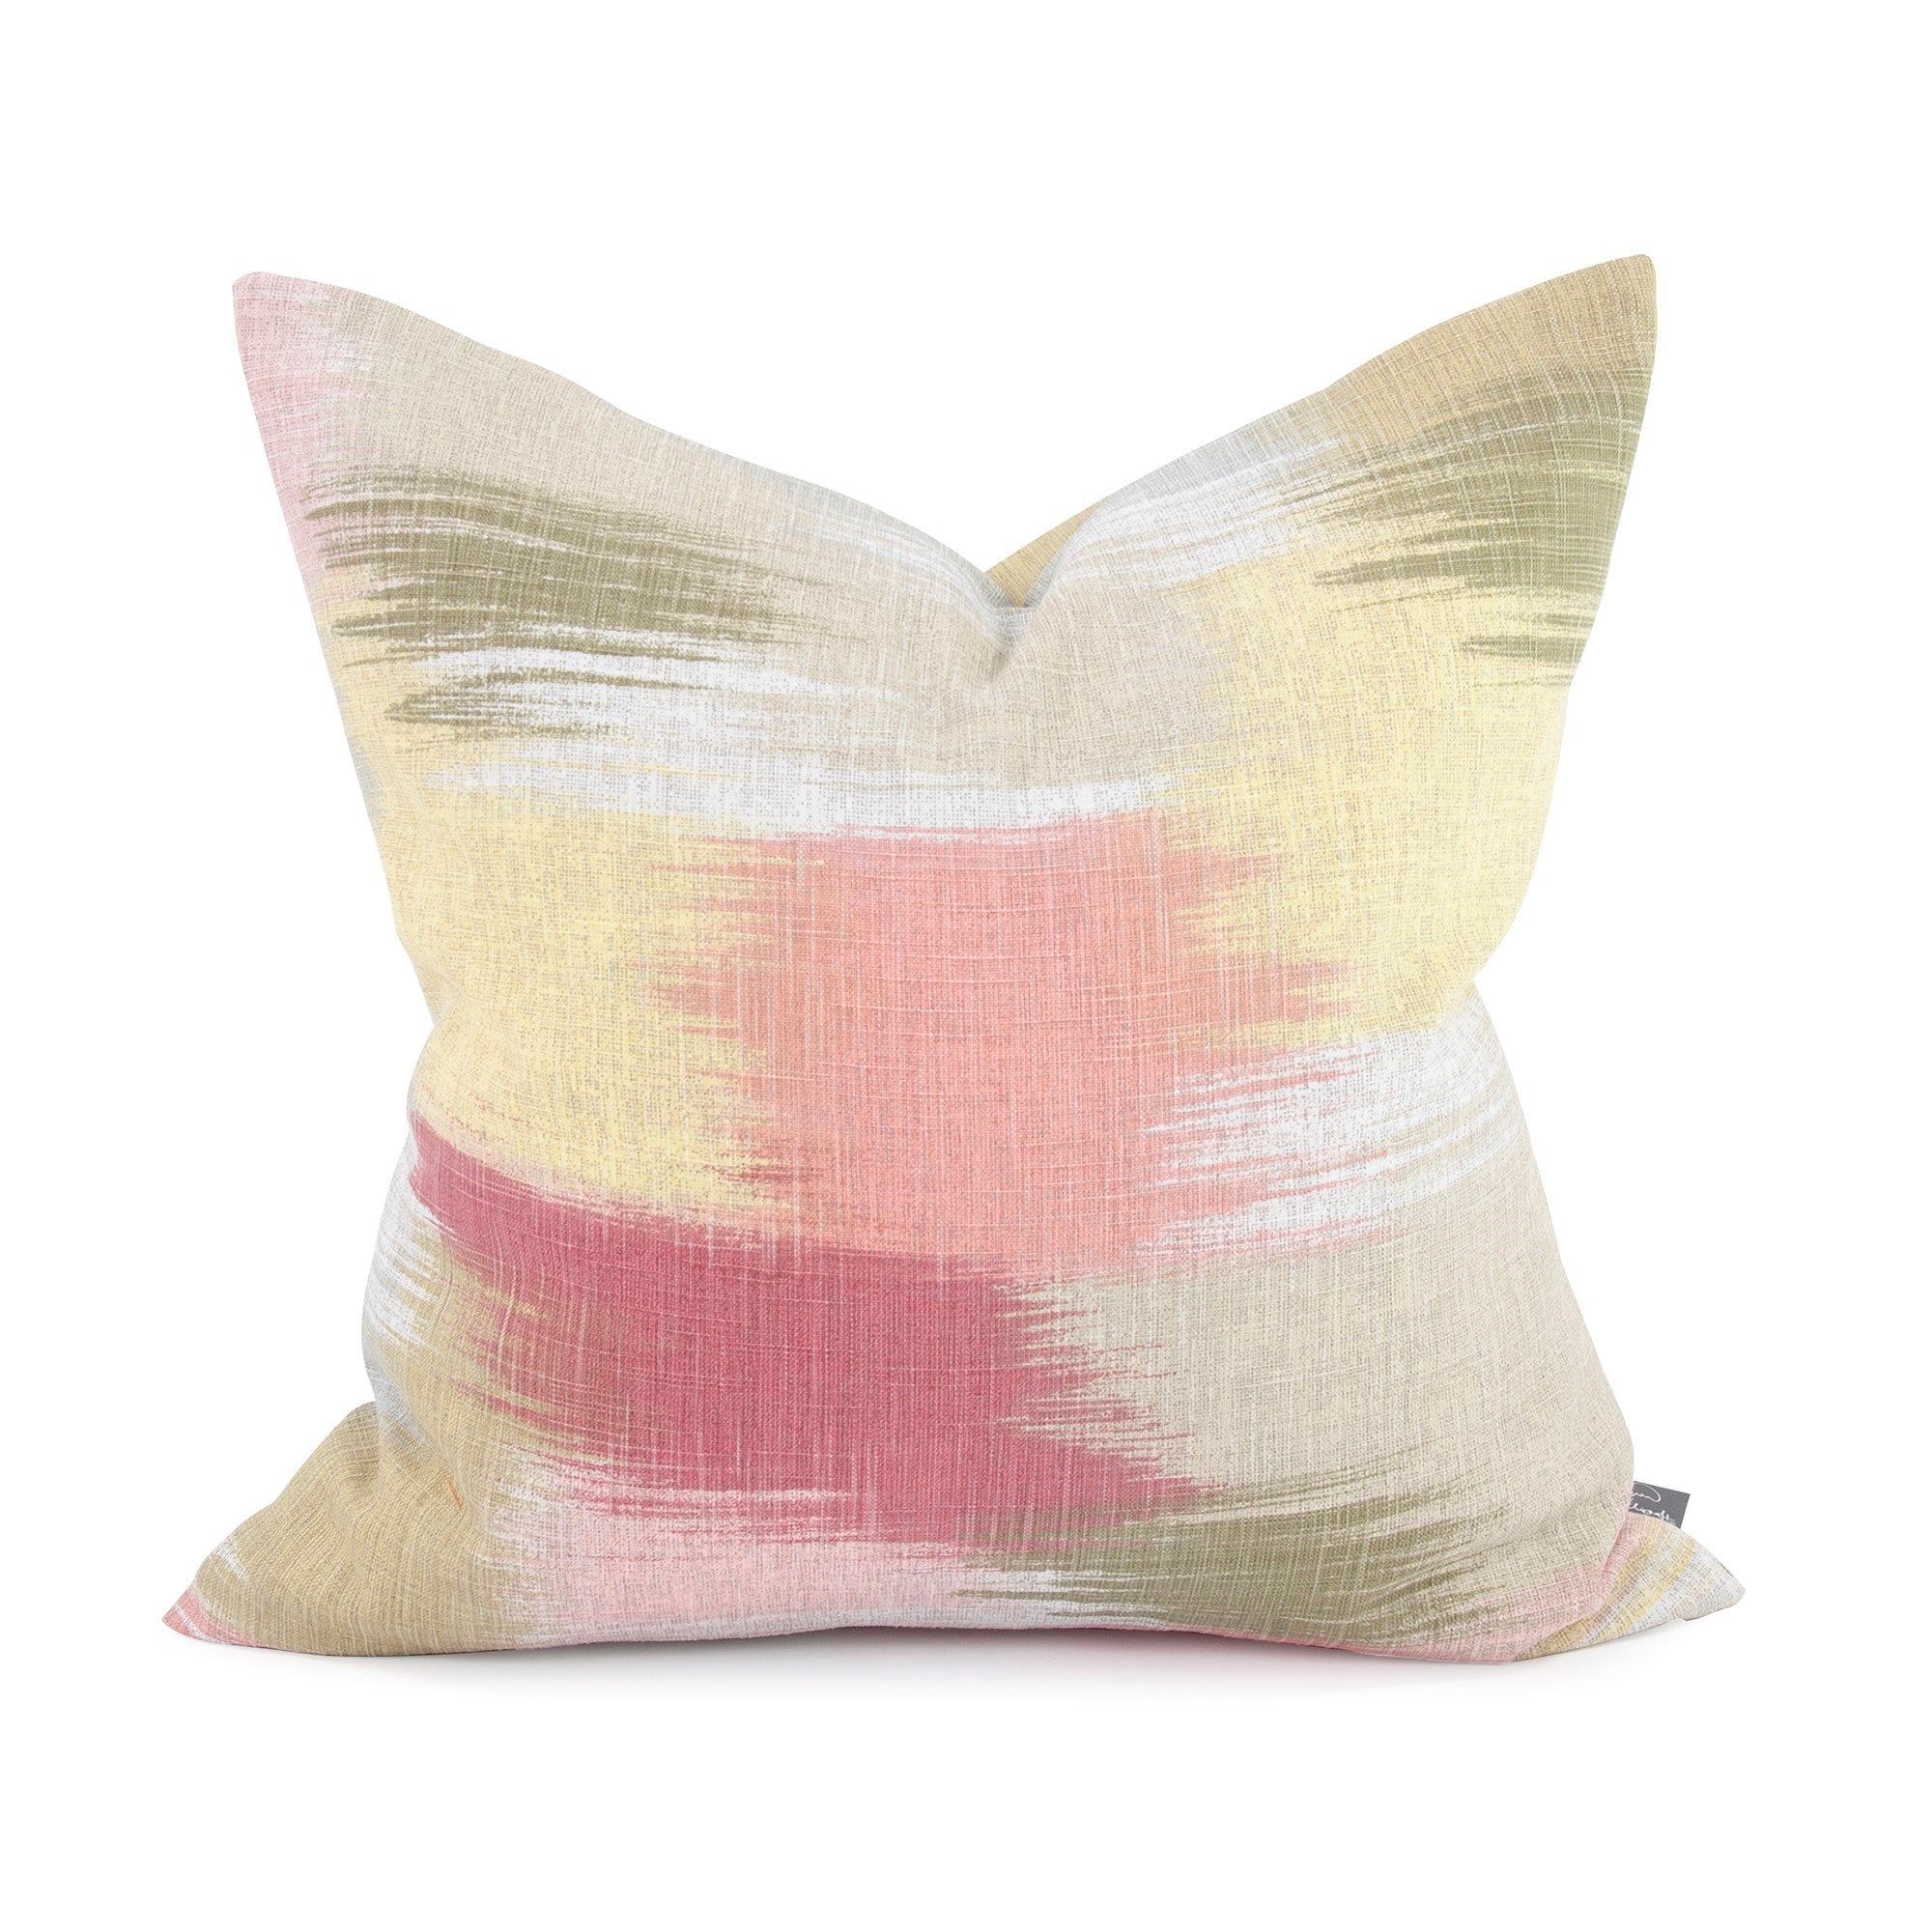 Gleam Coral Down Pillow- 20" x 20"